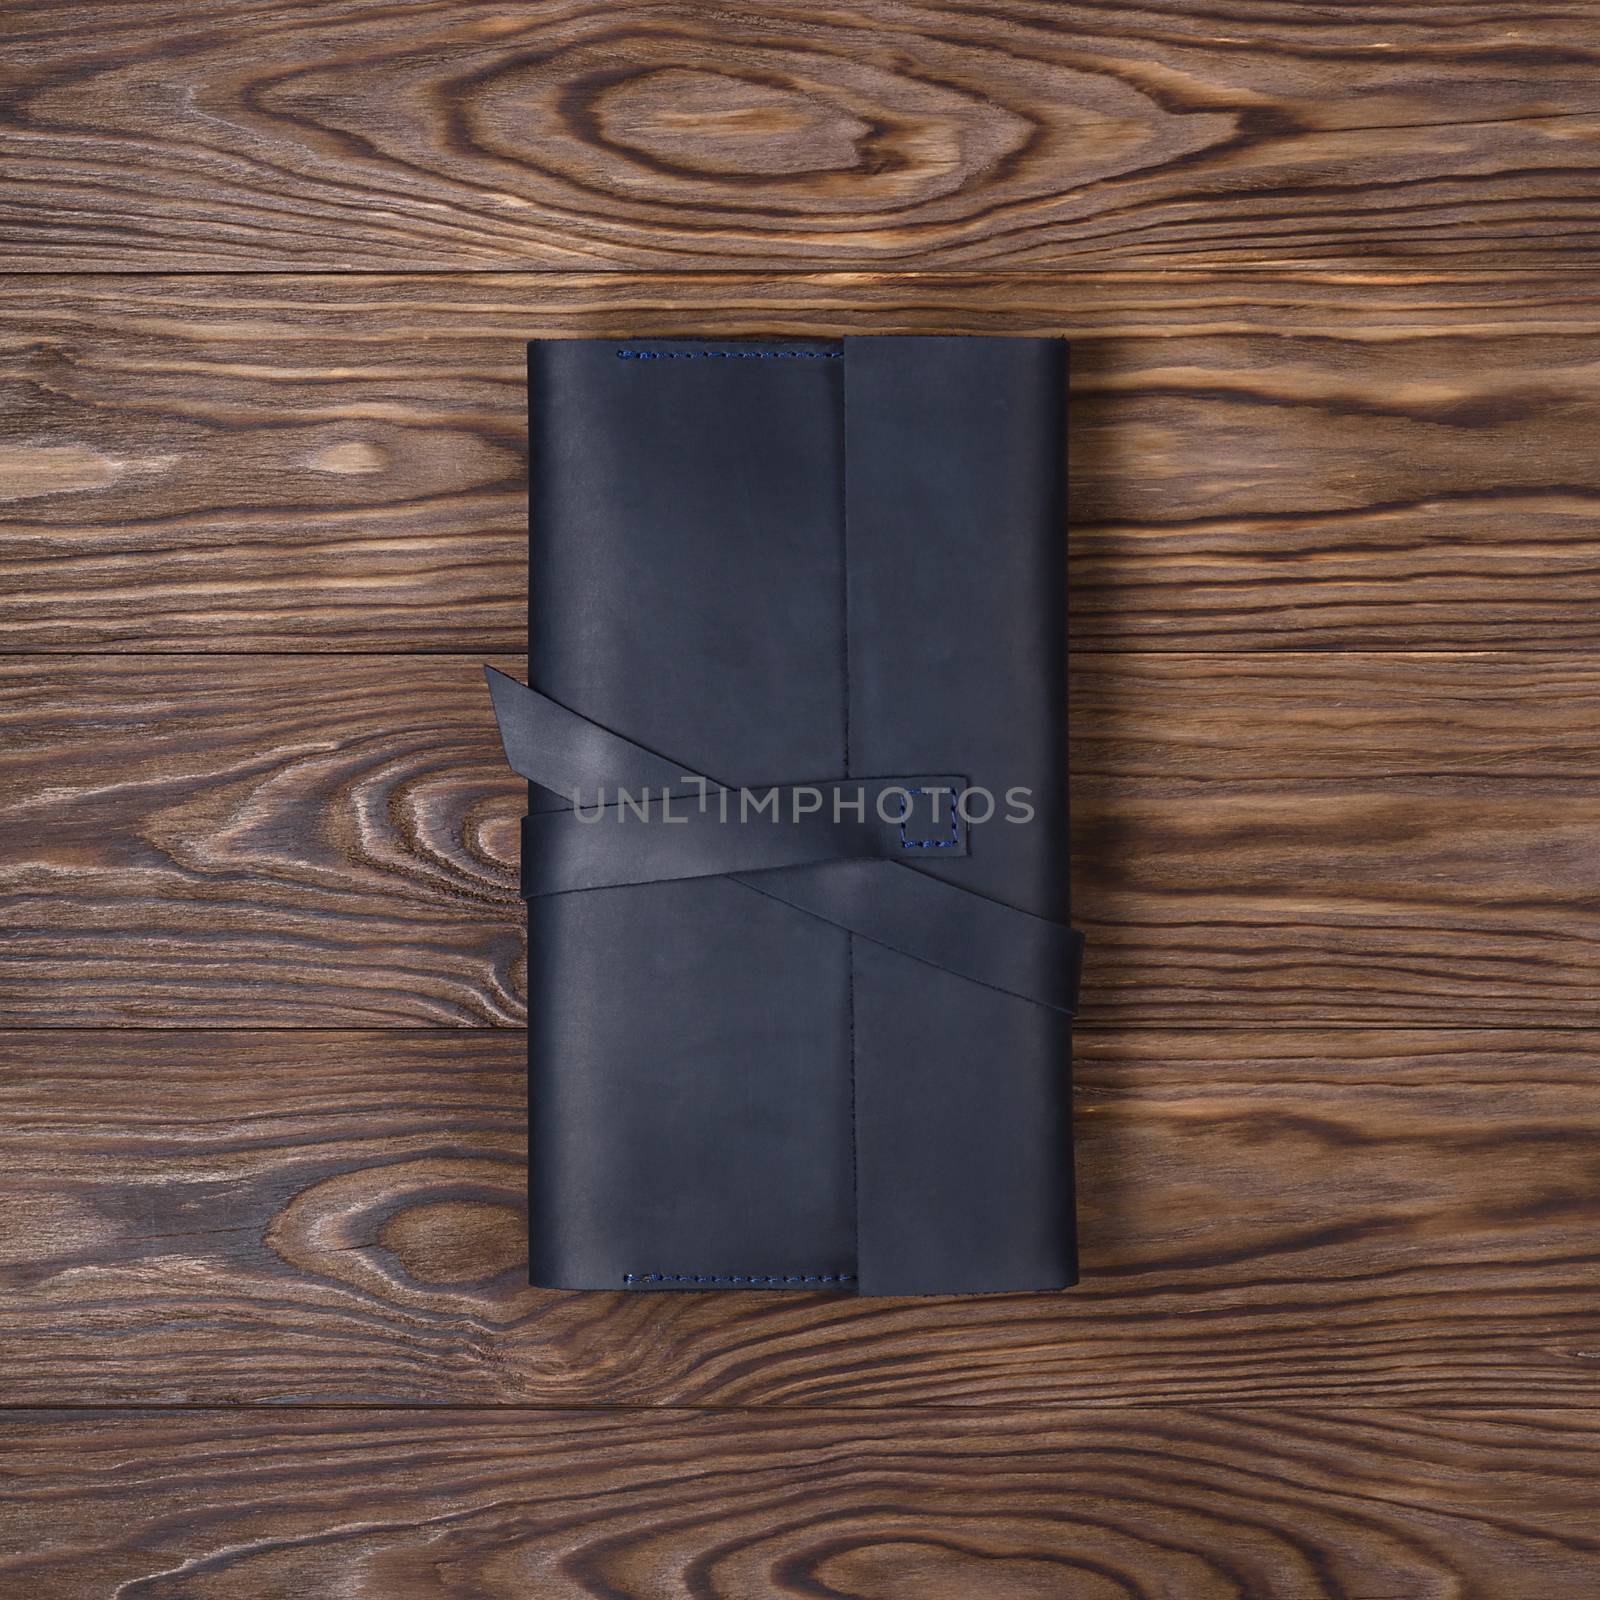 Black handmade travel wallet lies on textured wooden backgroud. Up to down view. Stock photo of businessman accessories.